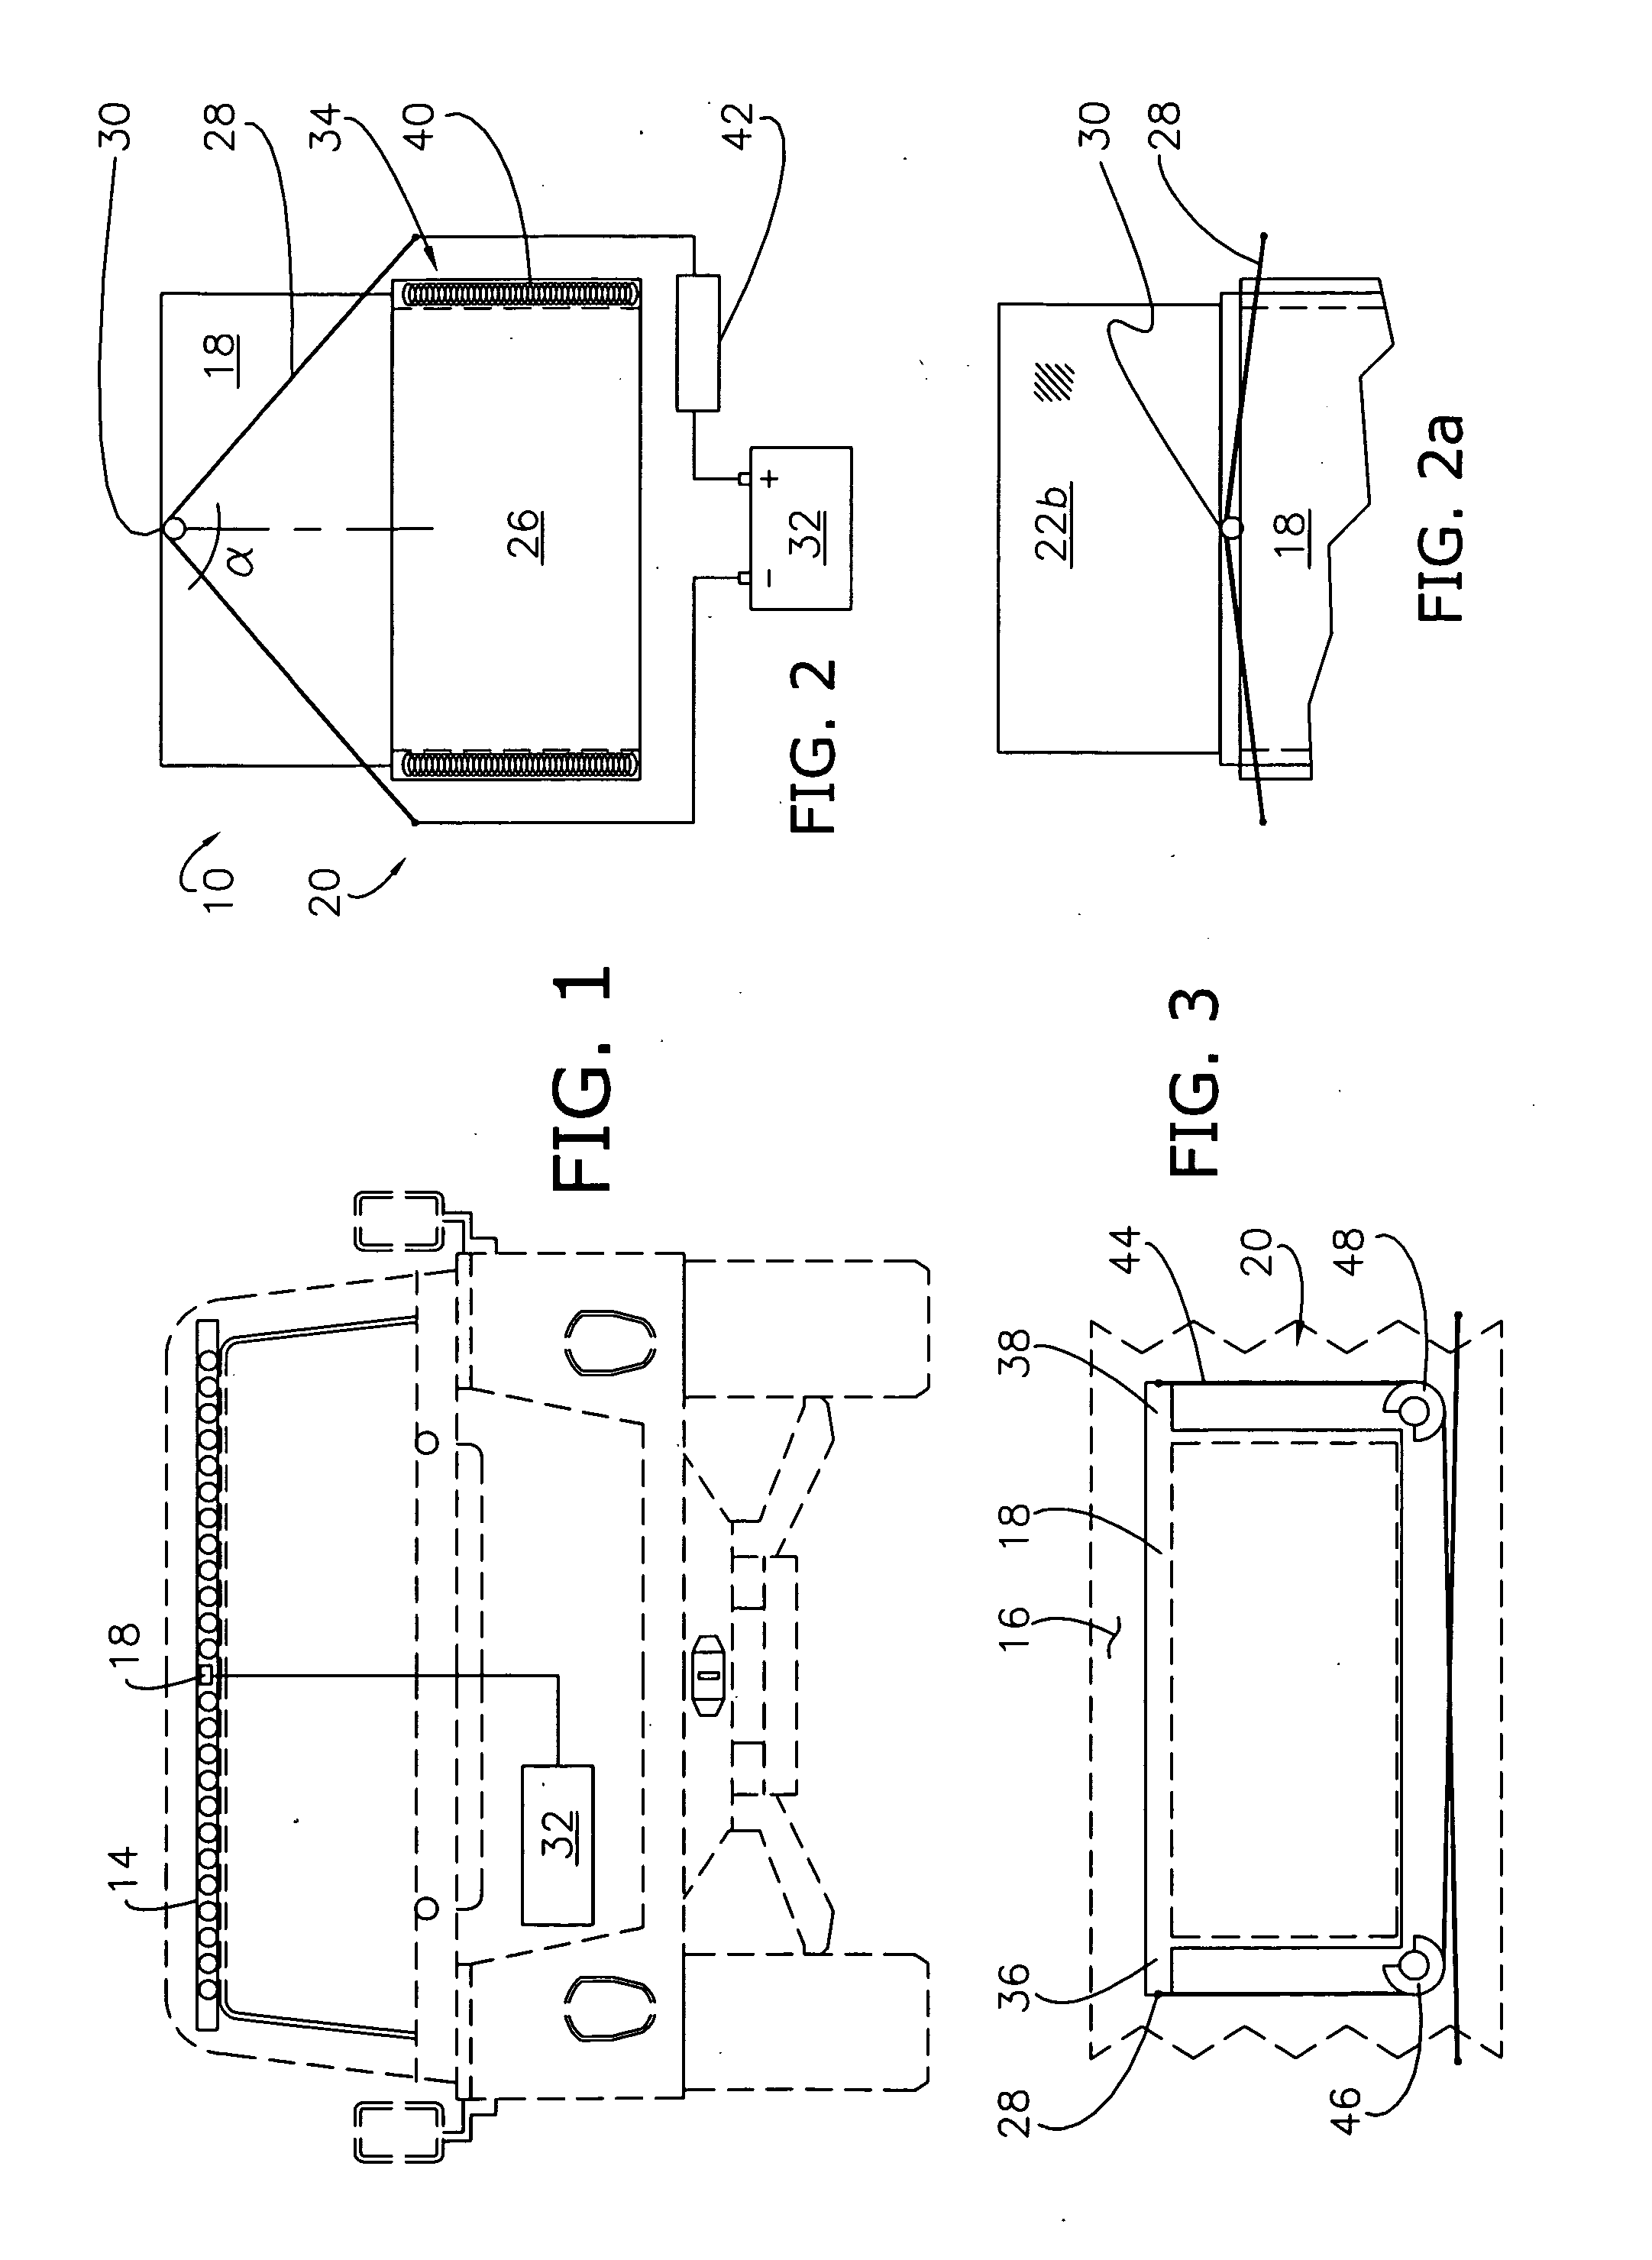 Receiver/emitter cover utilizing active material actuation